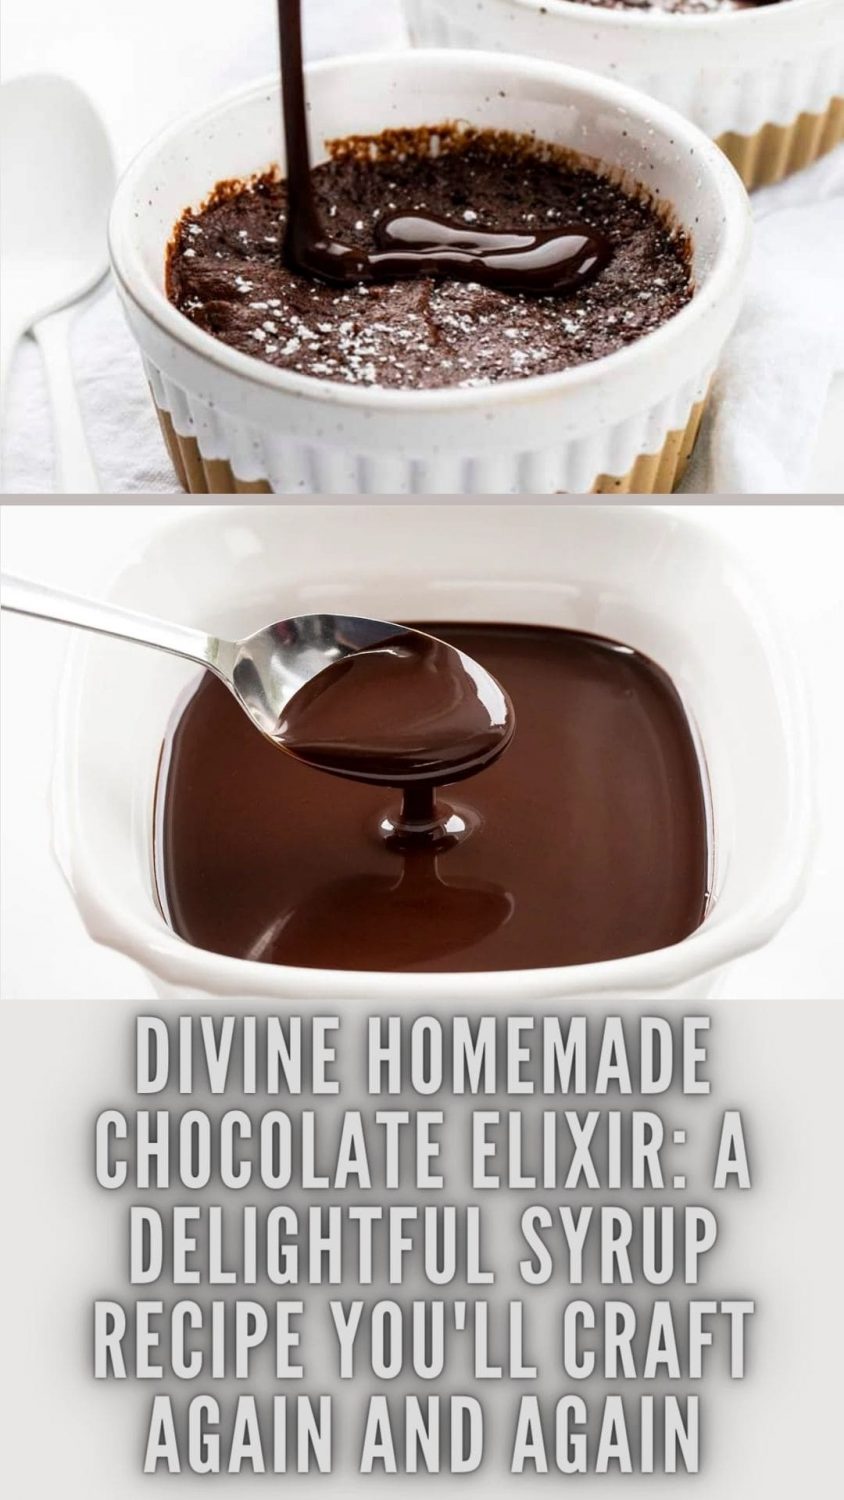 Divine Homemade Chocolate Elixir: A Delightful Syrup Recipe You'll Craft Again and Again